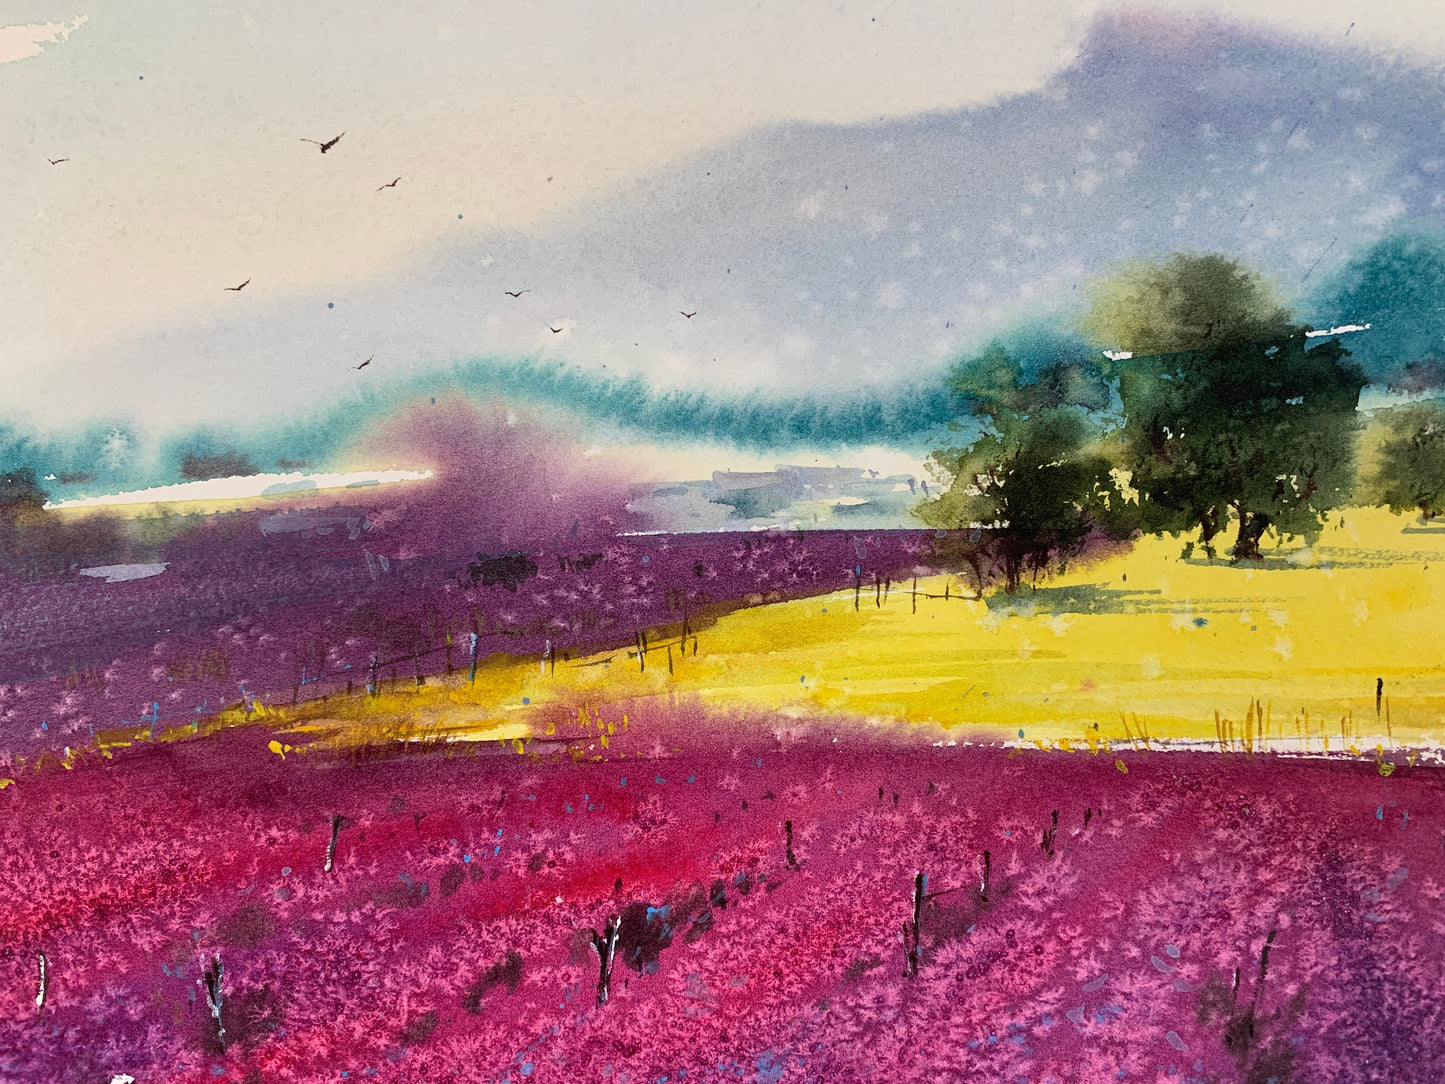 Lavender Field Painting, Original Watercolor Artwork, Landscape Wall Art, Gift For Her, Purple, Yellow, Blue